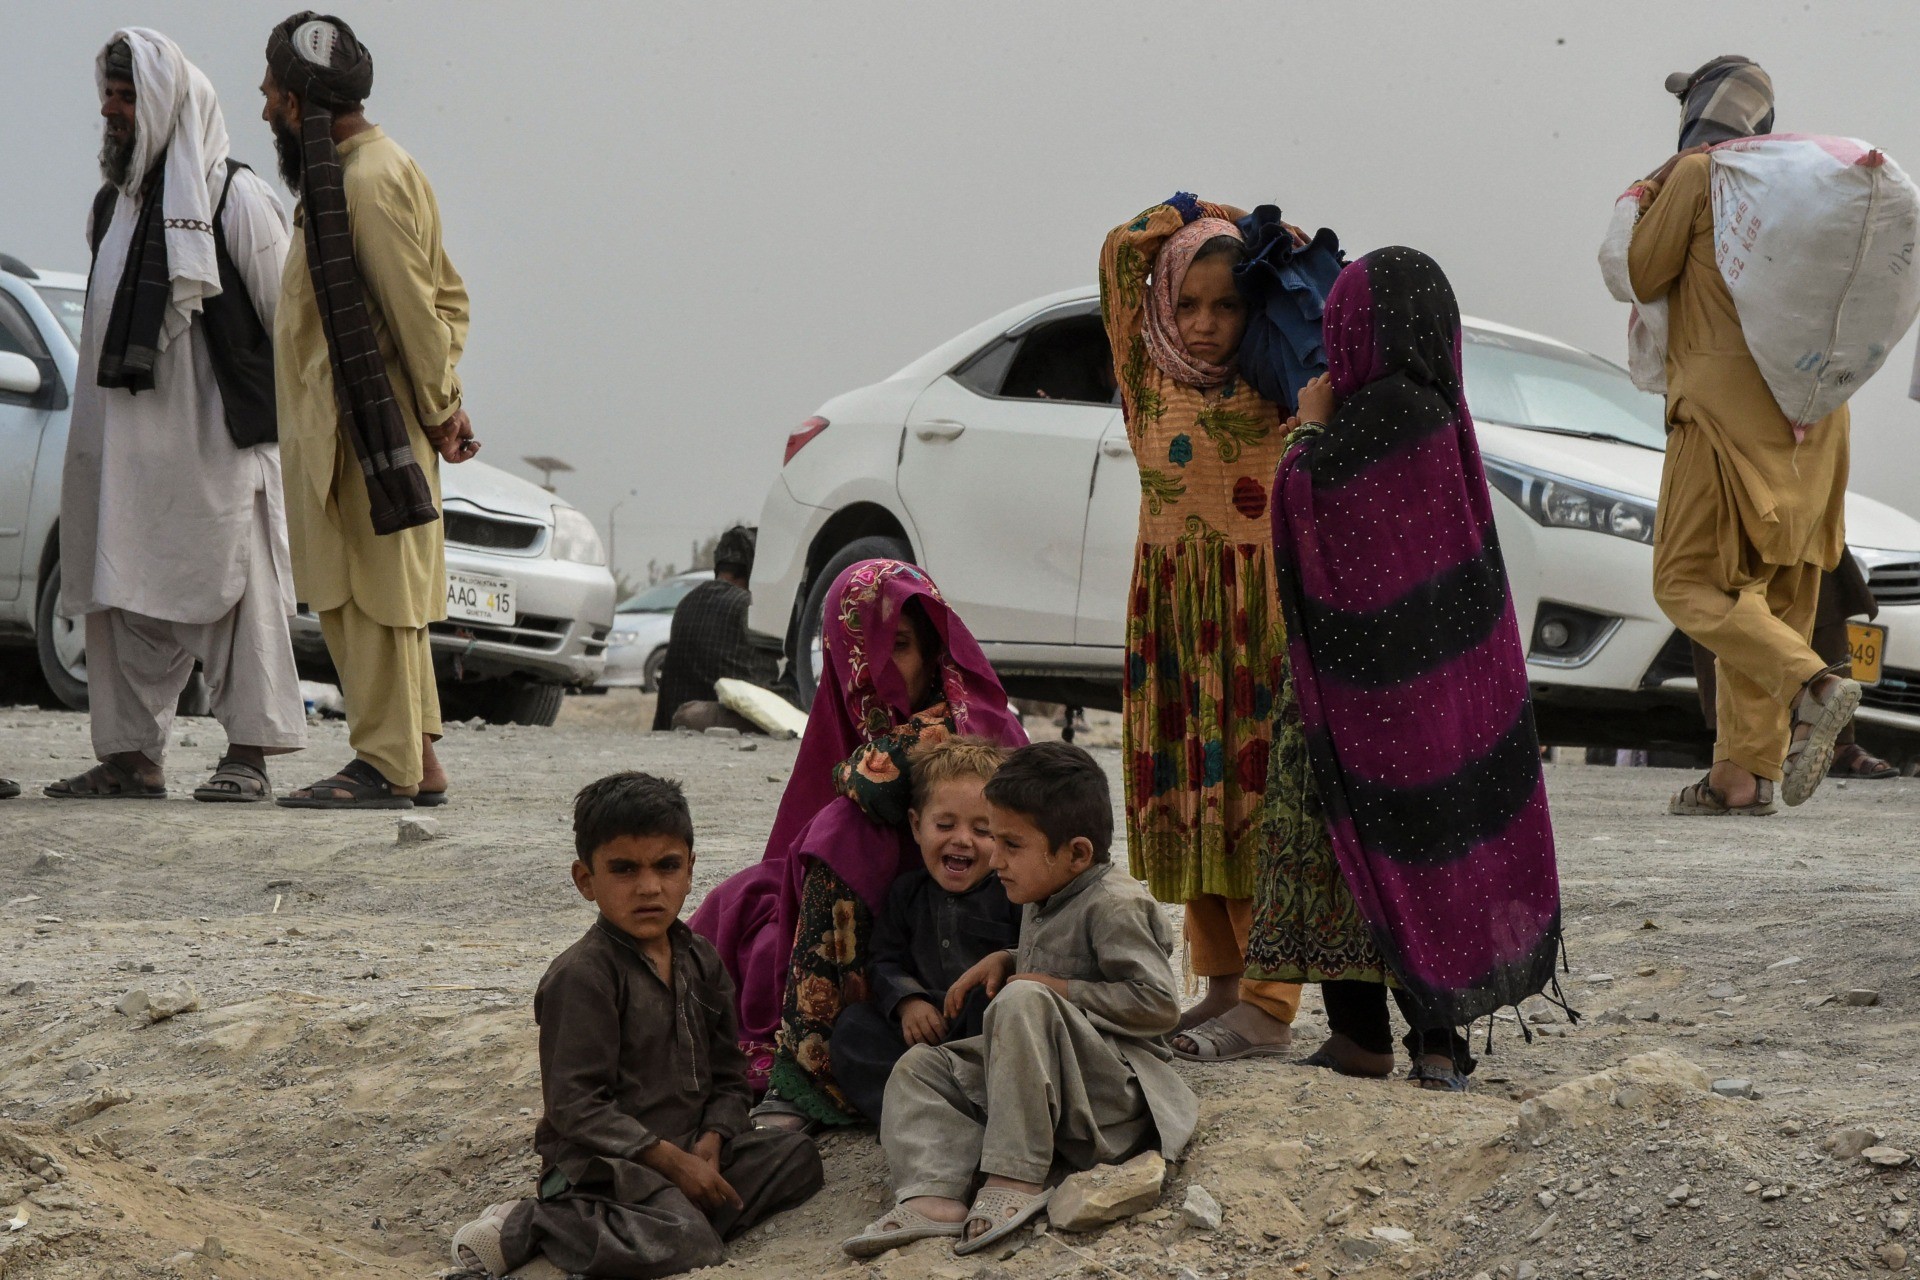 Stranded people wait for the reopening of border crossing point in the Pakistan's border town of Chaman on July 16, 2021, following clashes between Afghan forces and Taliban fighters in Spin Boldak to retake the key border crossing with Pakistan. (Photo by Banaras KHAN / AFP) (Photo by BANARAS KHAN/AFP via Getty Images)